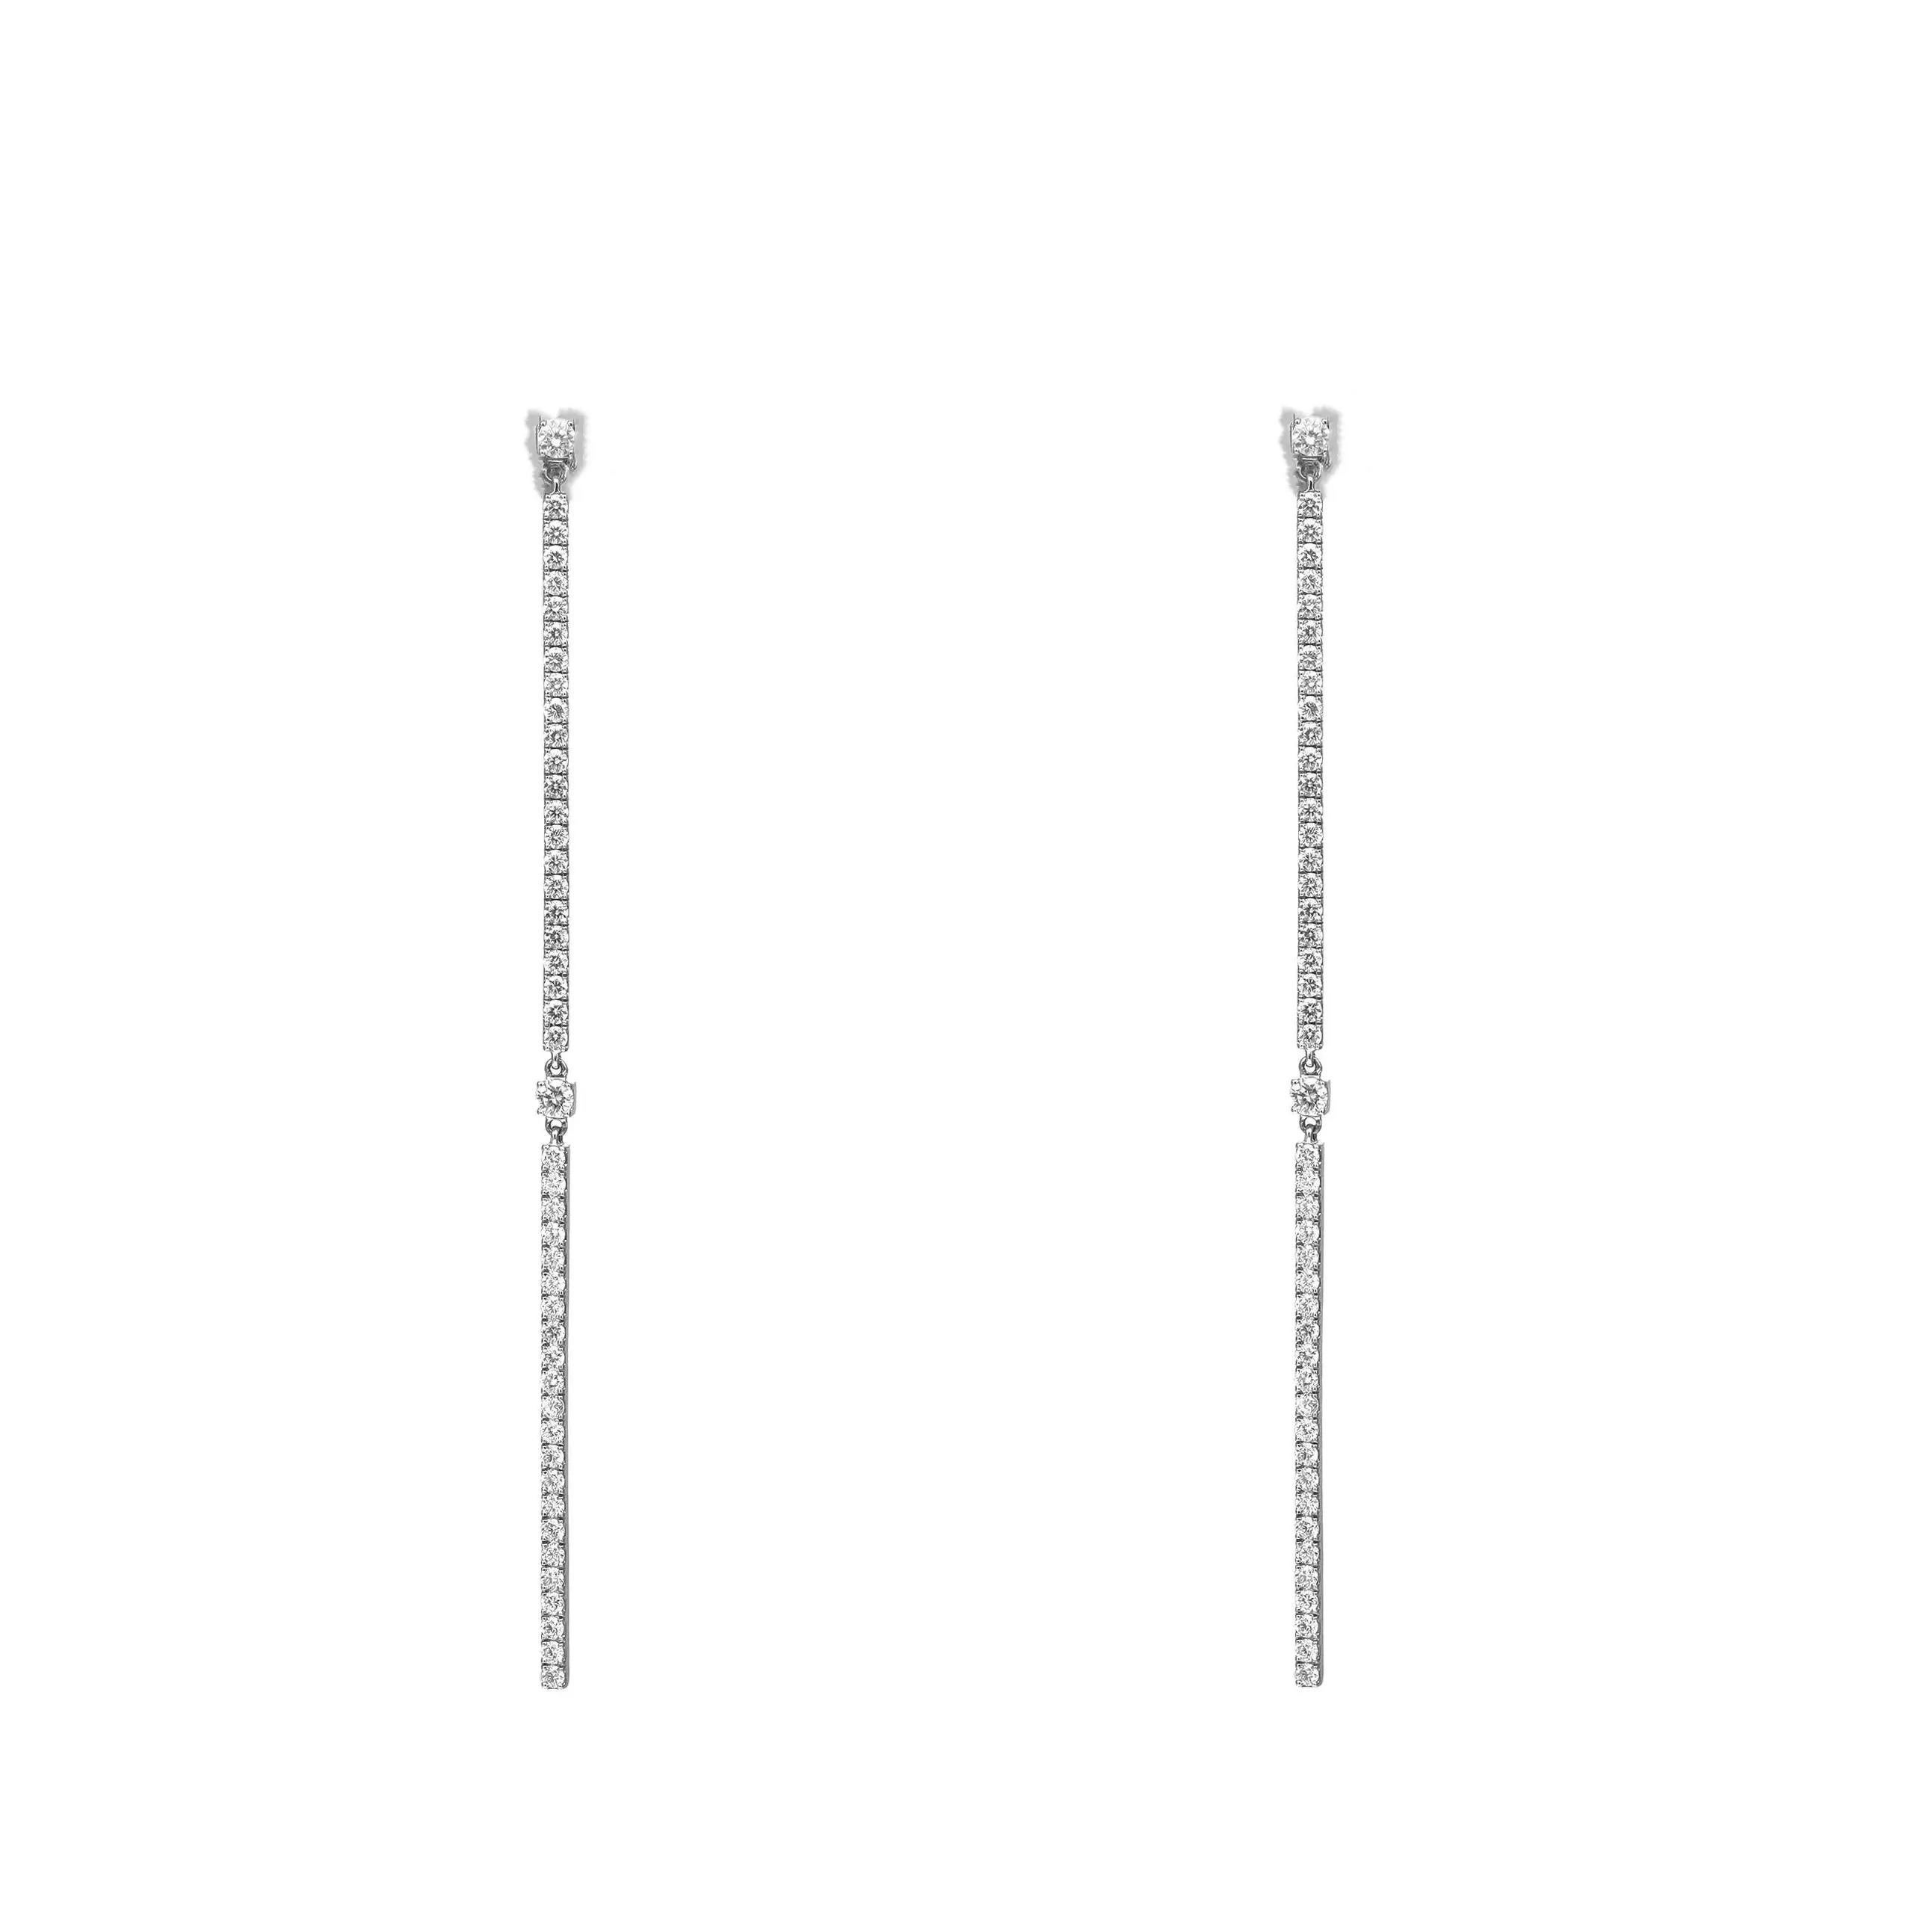 Messika 1.26Cttw 2 Barrettes Gatsby Diamond Long Drop Earrings 18K White Gold For Sale